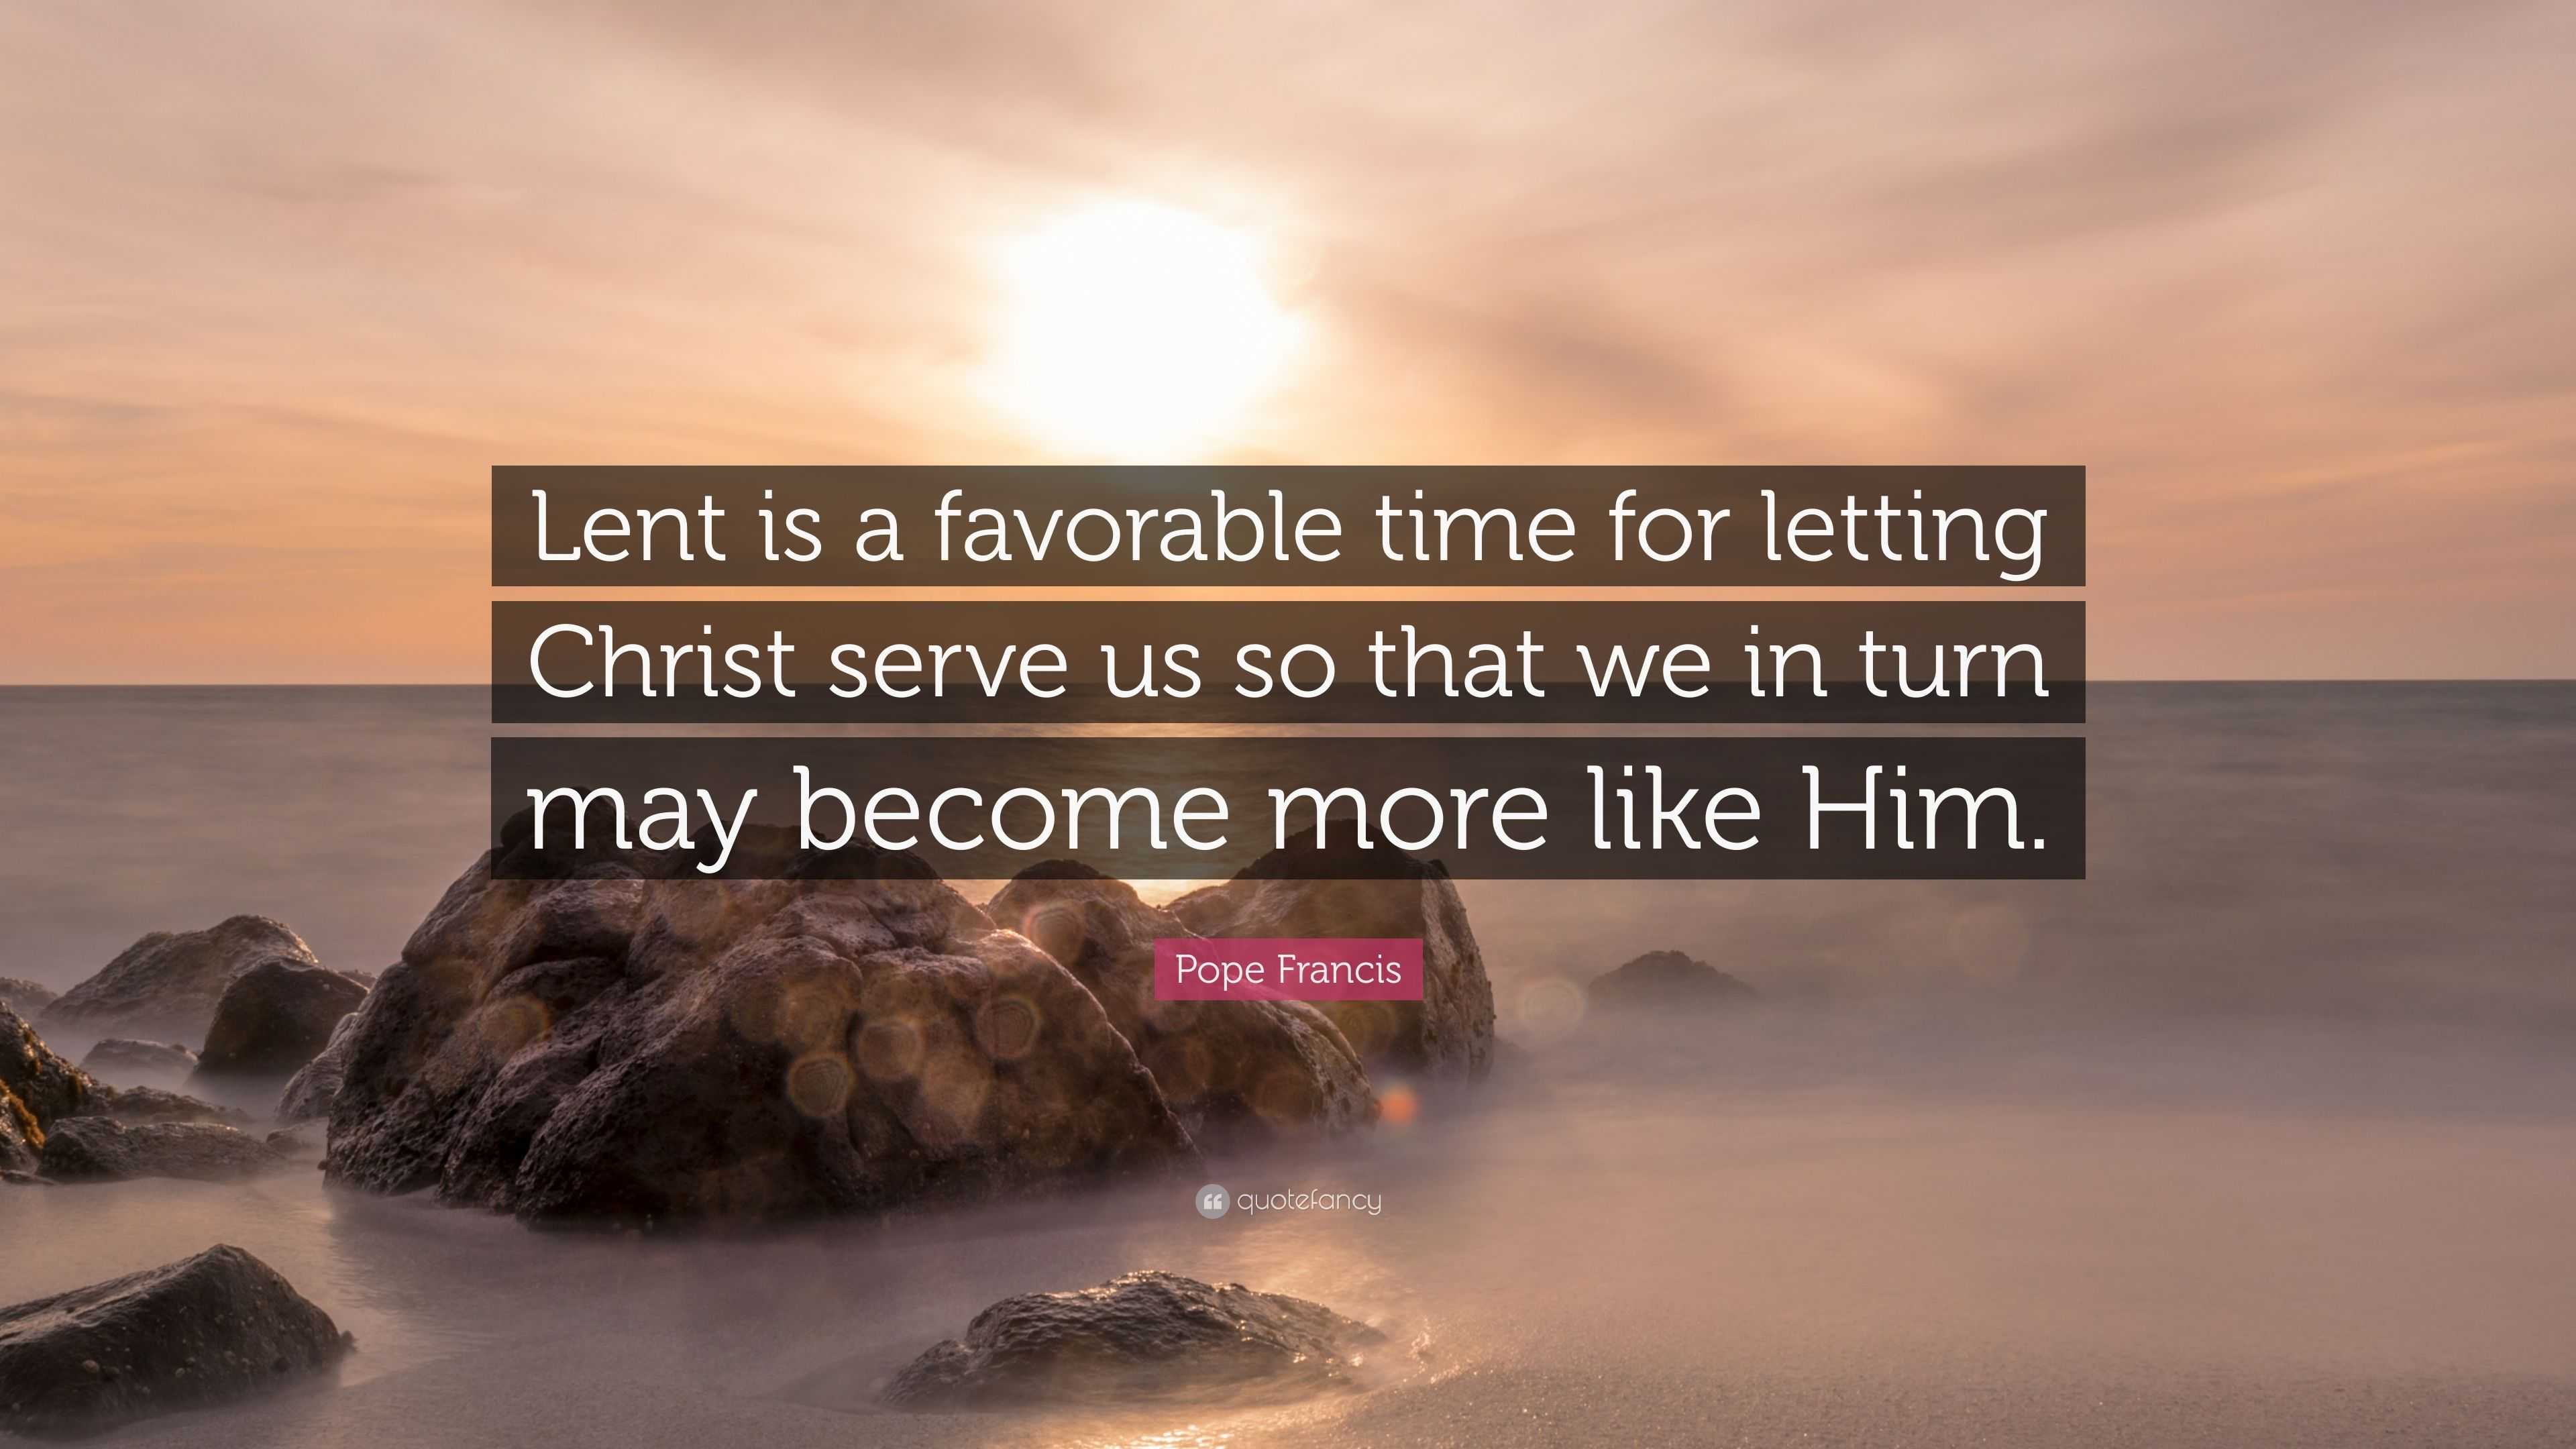 Pope Francis Quote “Lent is a favorable time for letting Christ serve